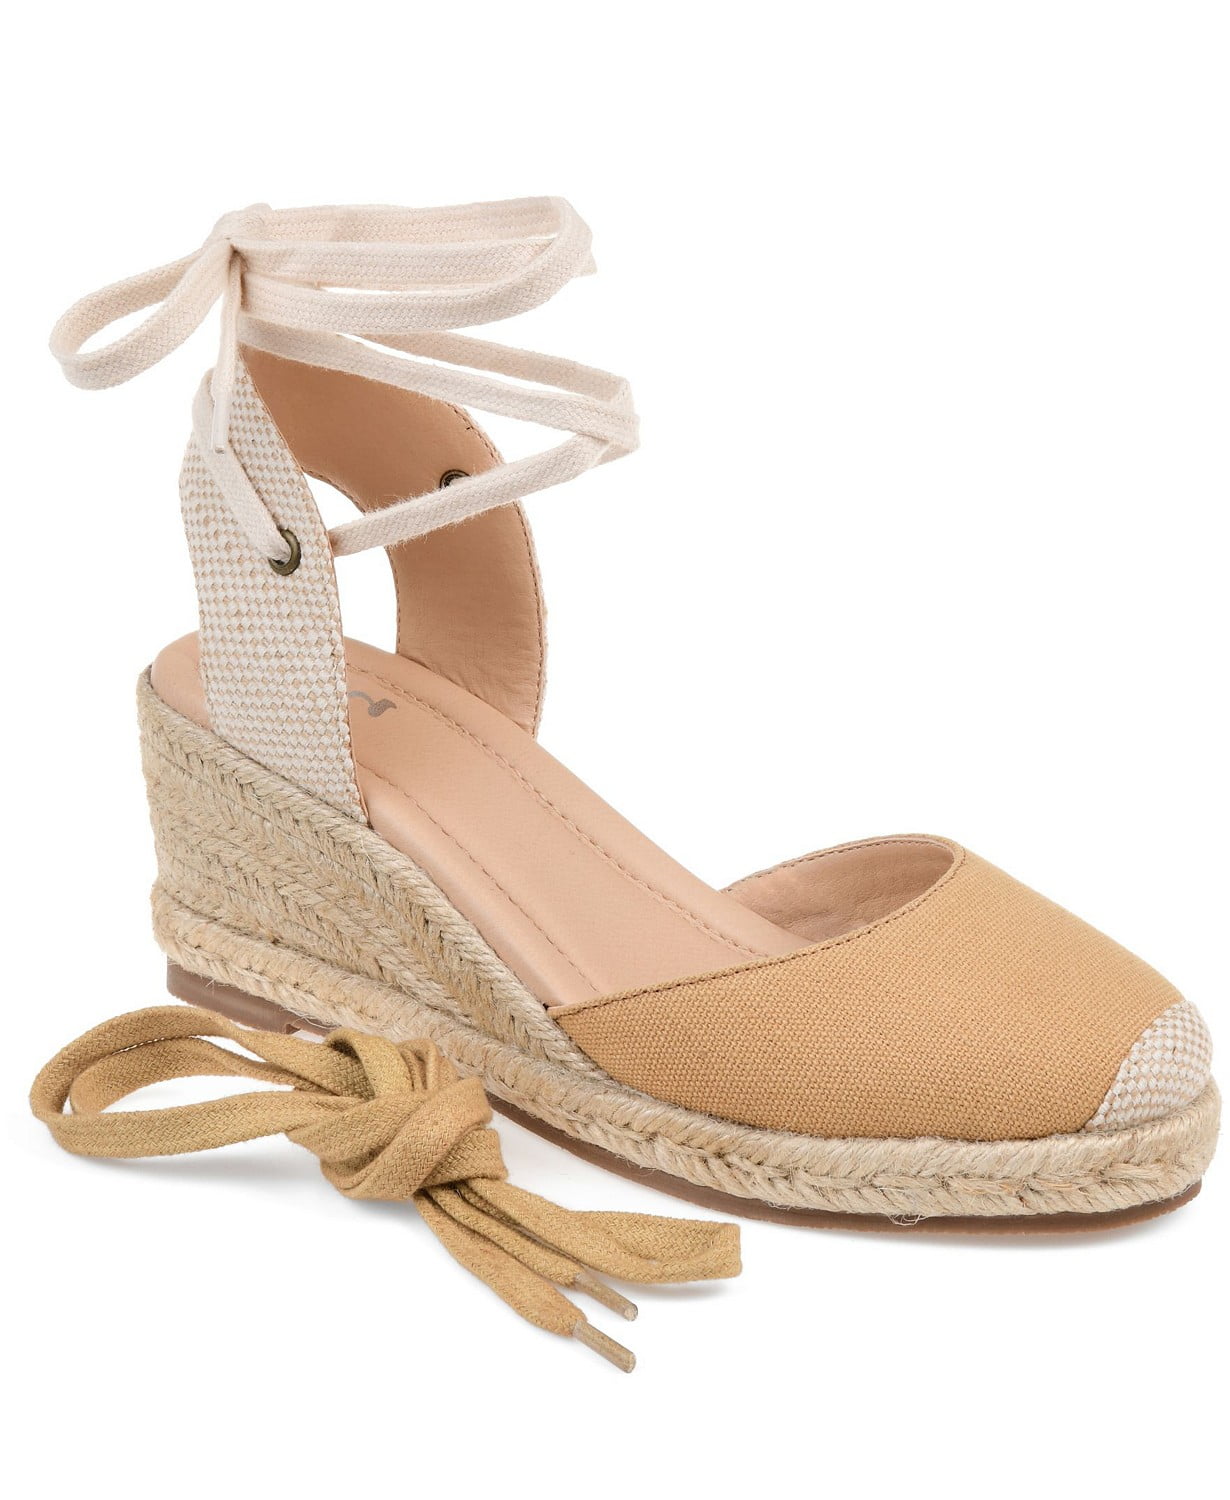 woocommerce-673321-2209615.cloudwaysapps.com-journee-collection-womens-tan-monte-espadrille-wedges